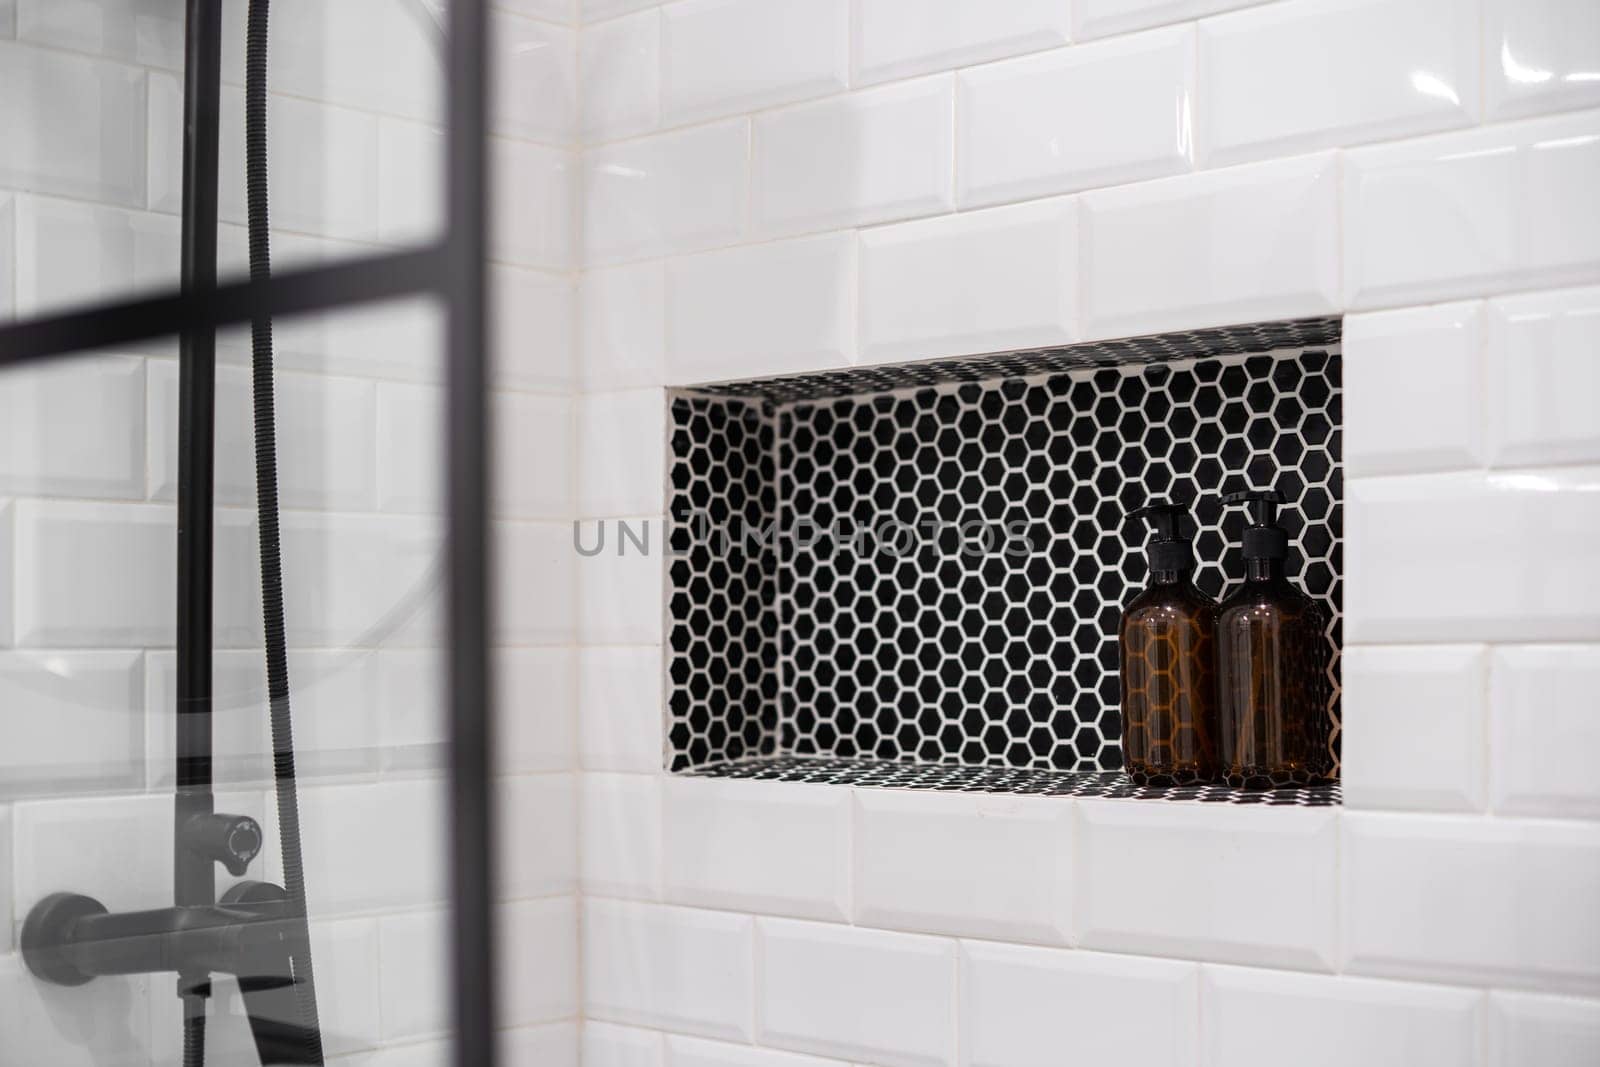 Built-in shelf with bottles in modern bathroom. Shower wall with white tiles. by apavlin